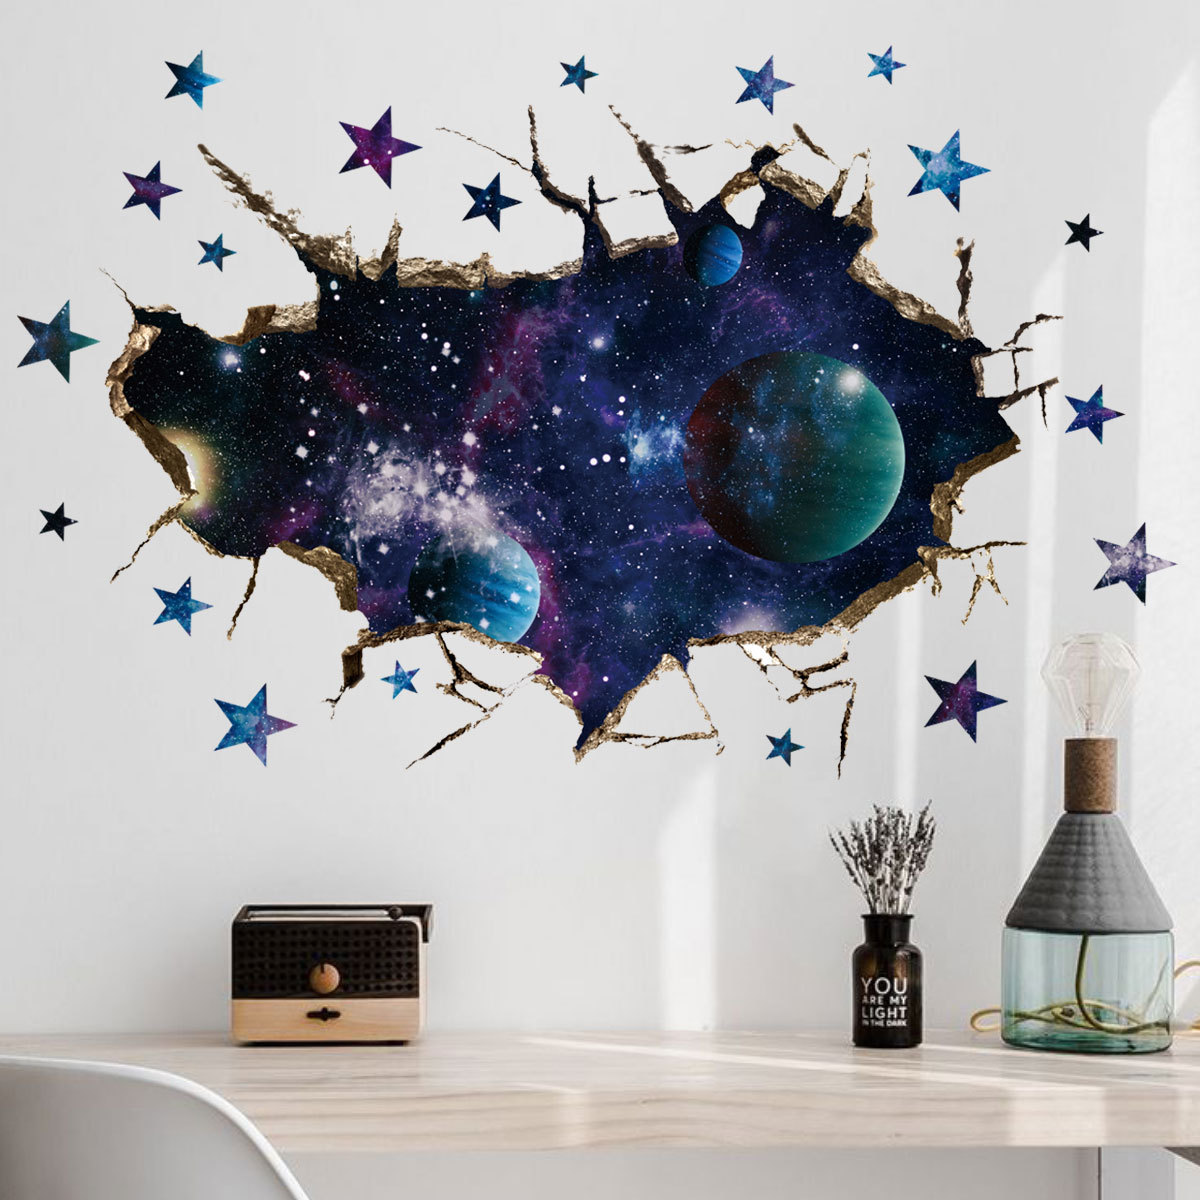 Space Theme Wall Stickers Space Decals for Bedroom Space Decal